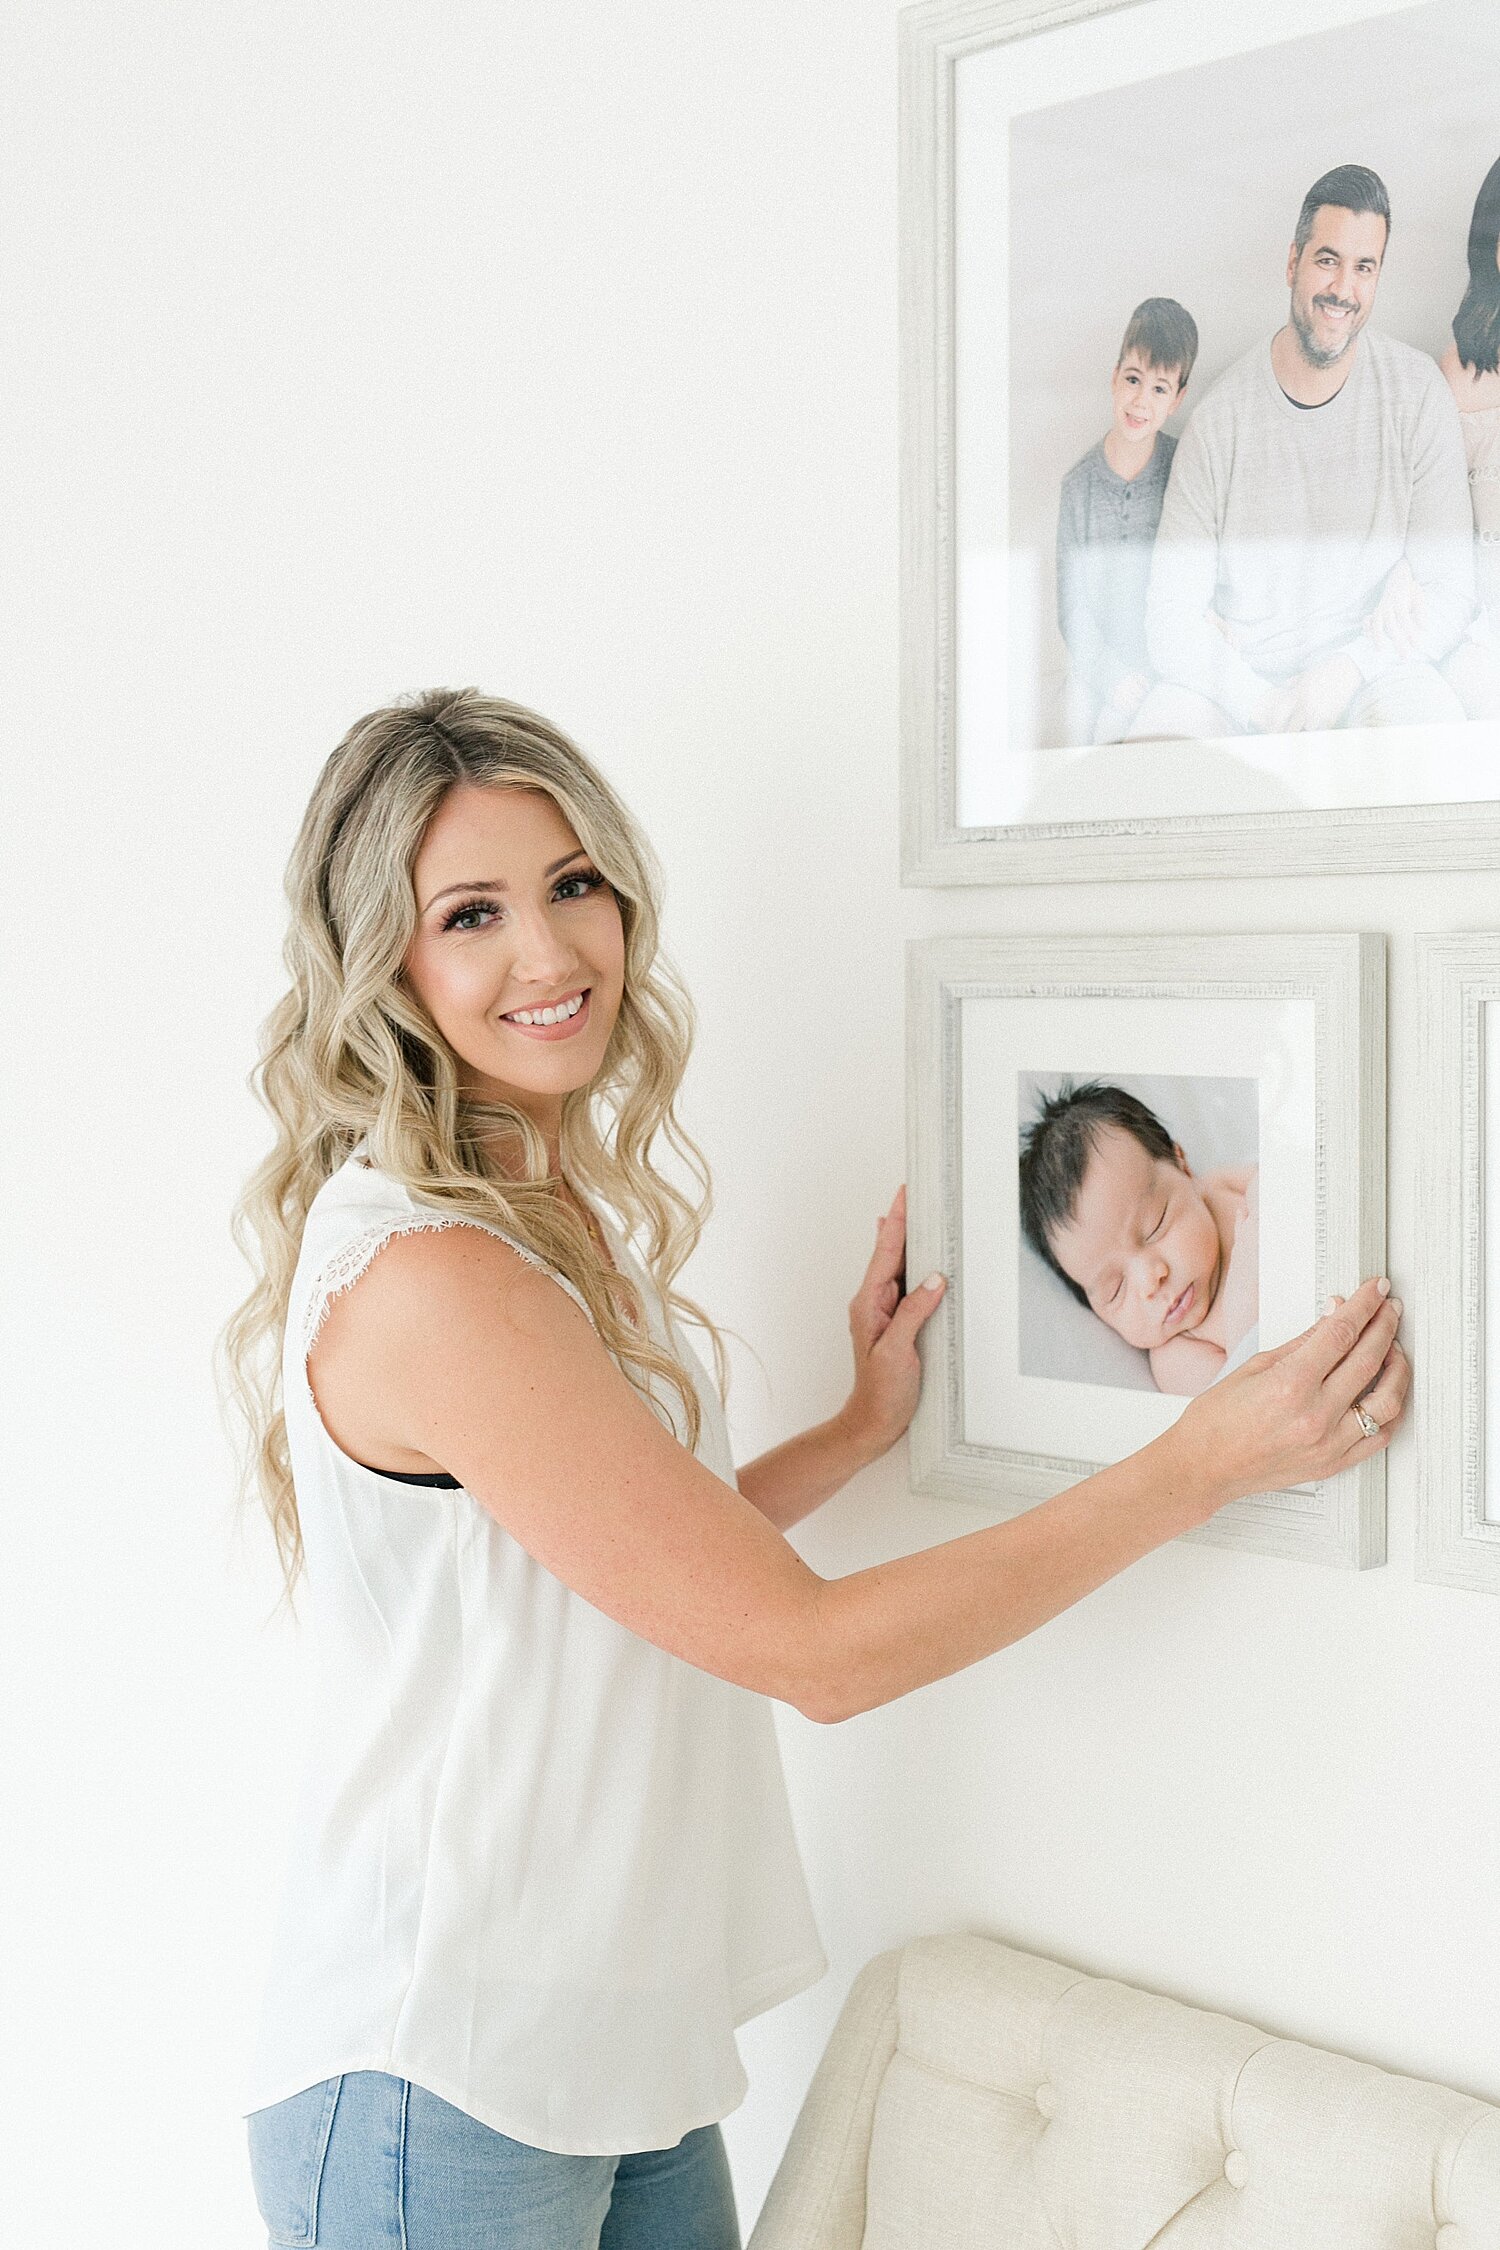 Custom framing and installation of newborn session with Newport Beach photographer, Ambre Williams Photography.